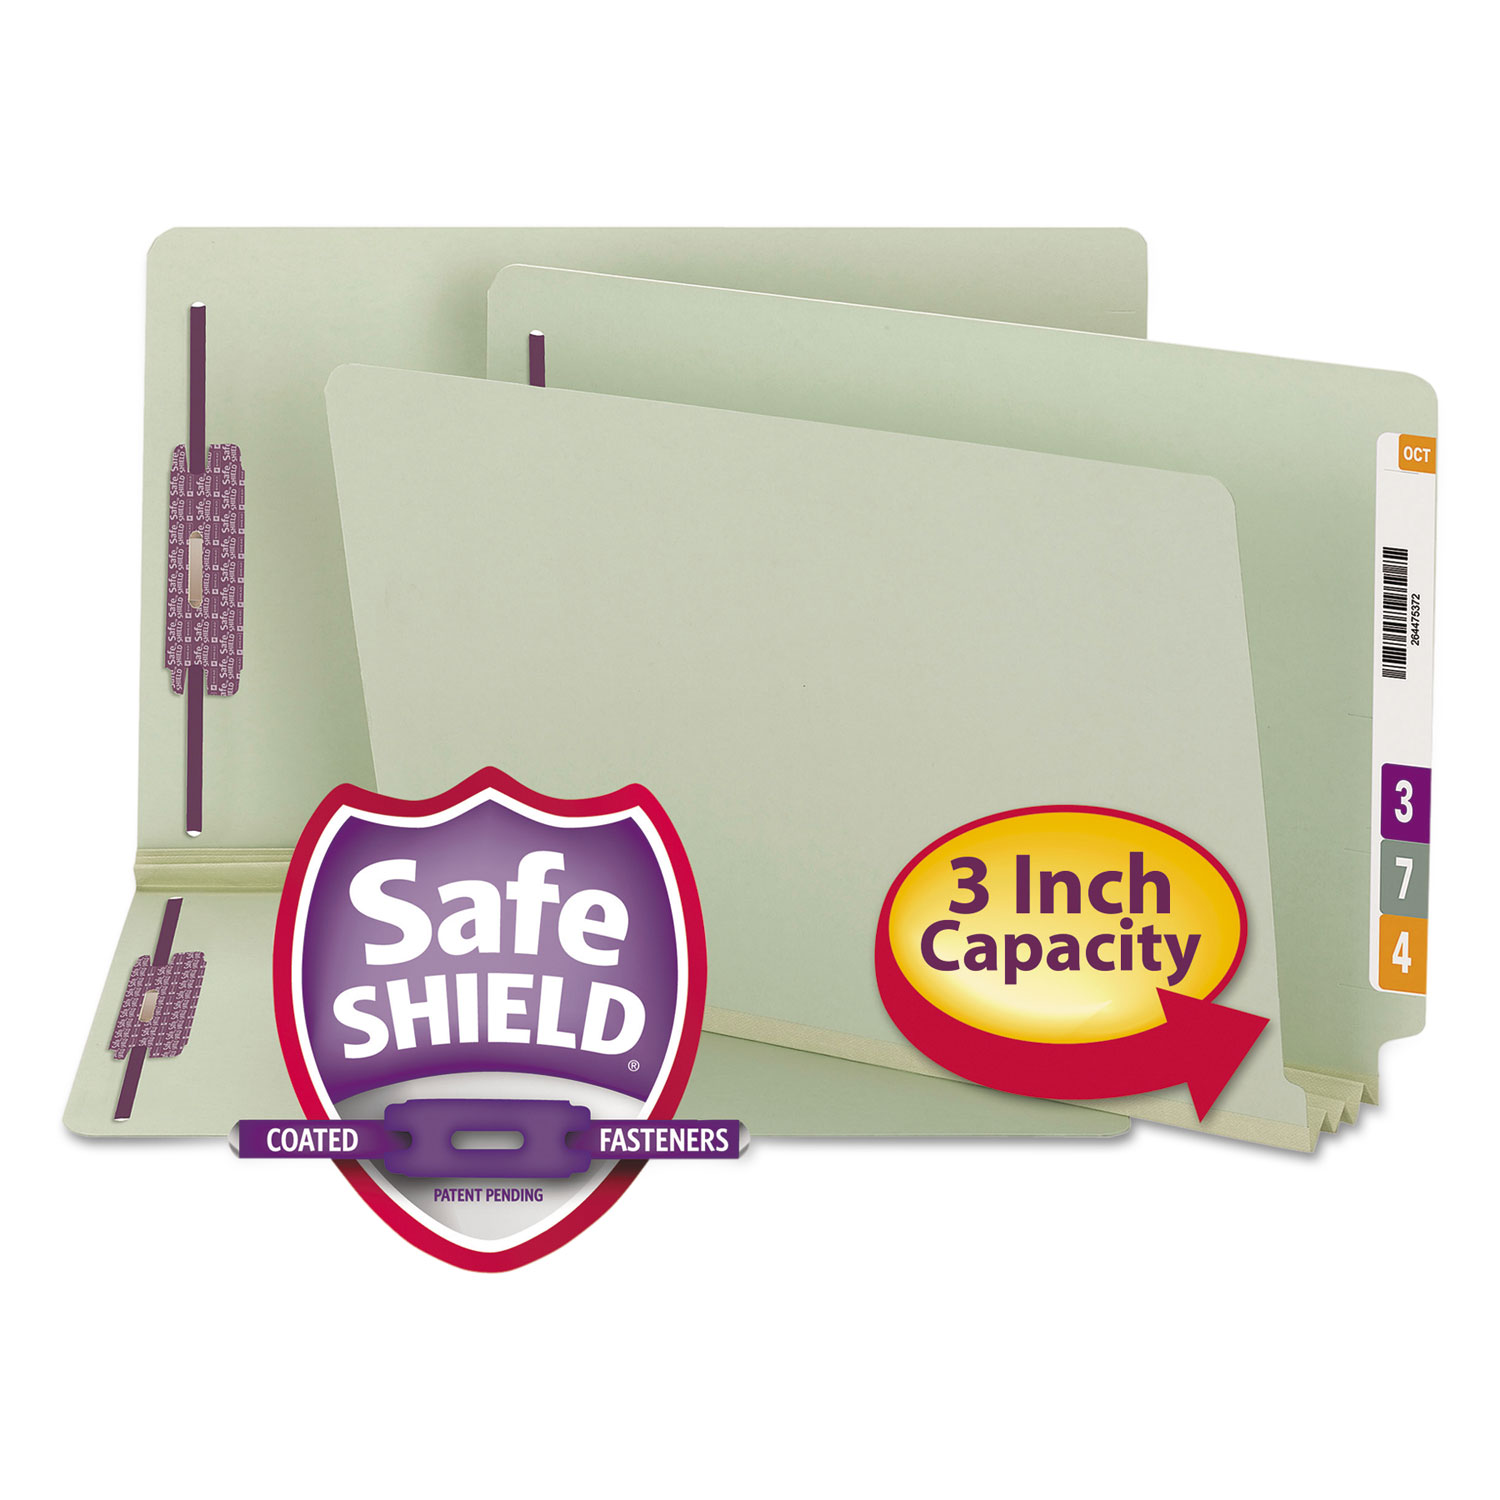 End Tab 3" Expansion Pressboard File Folders with Two SafeSHIELD Coated Fasteners, Straight Tab, Legal, Gray-Green, 25/Box